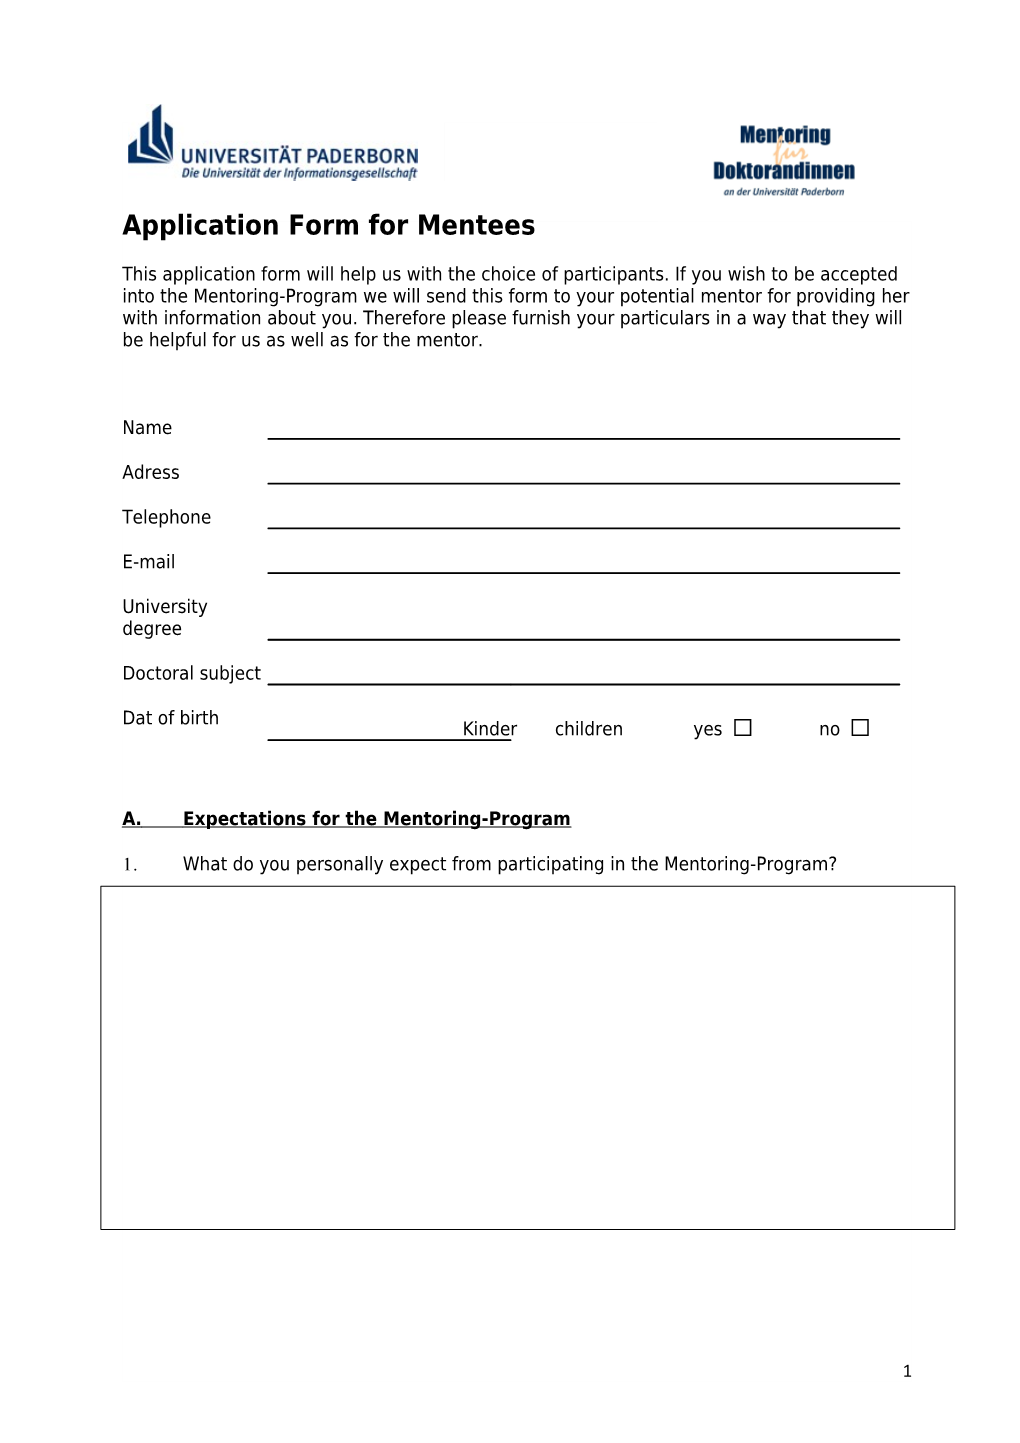 Application Form for Mentees